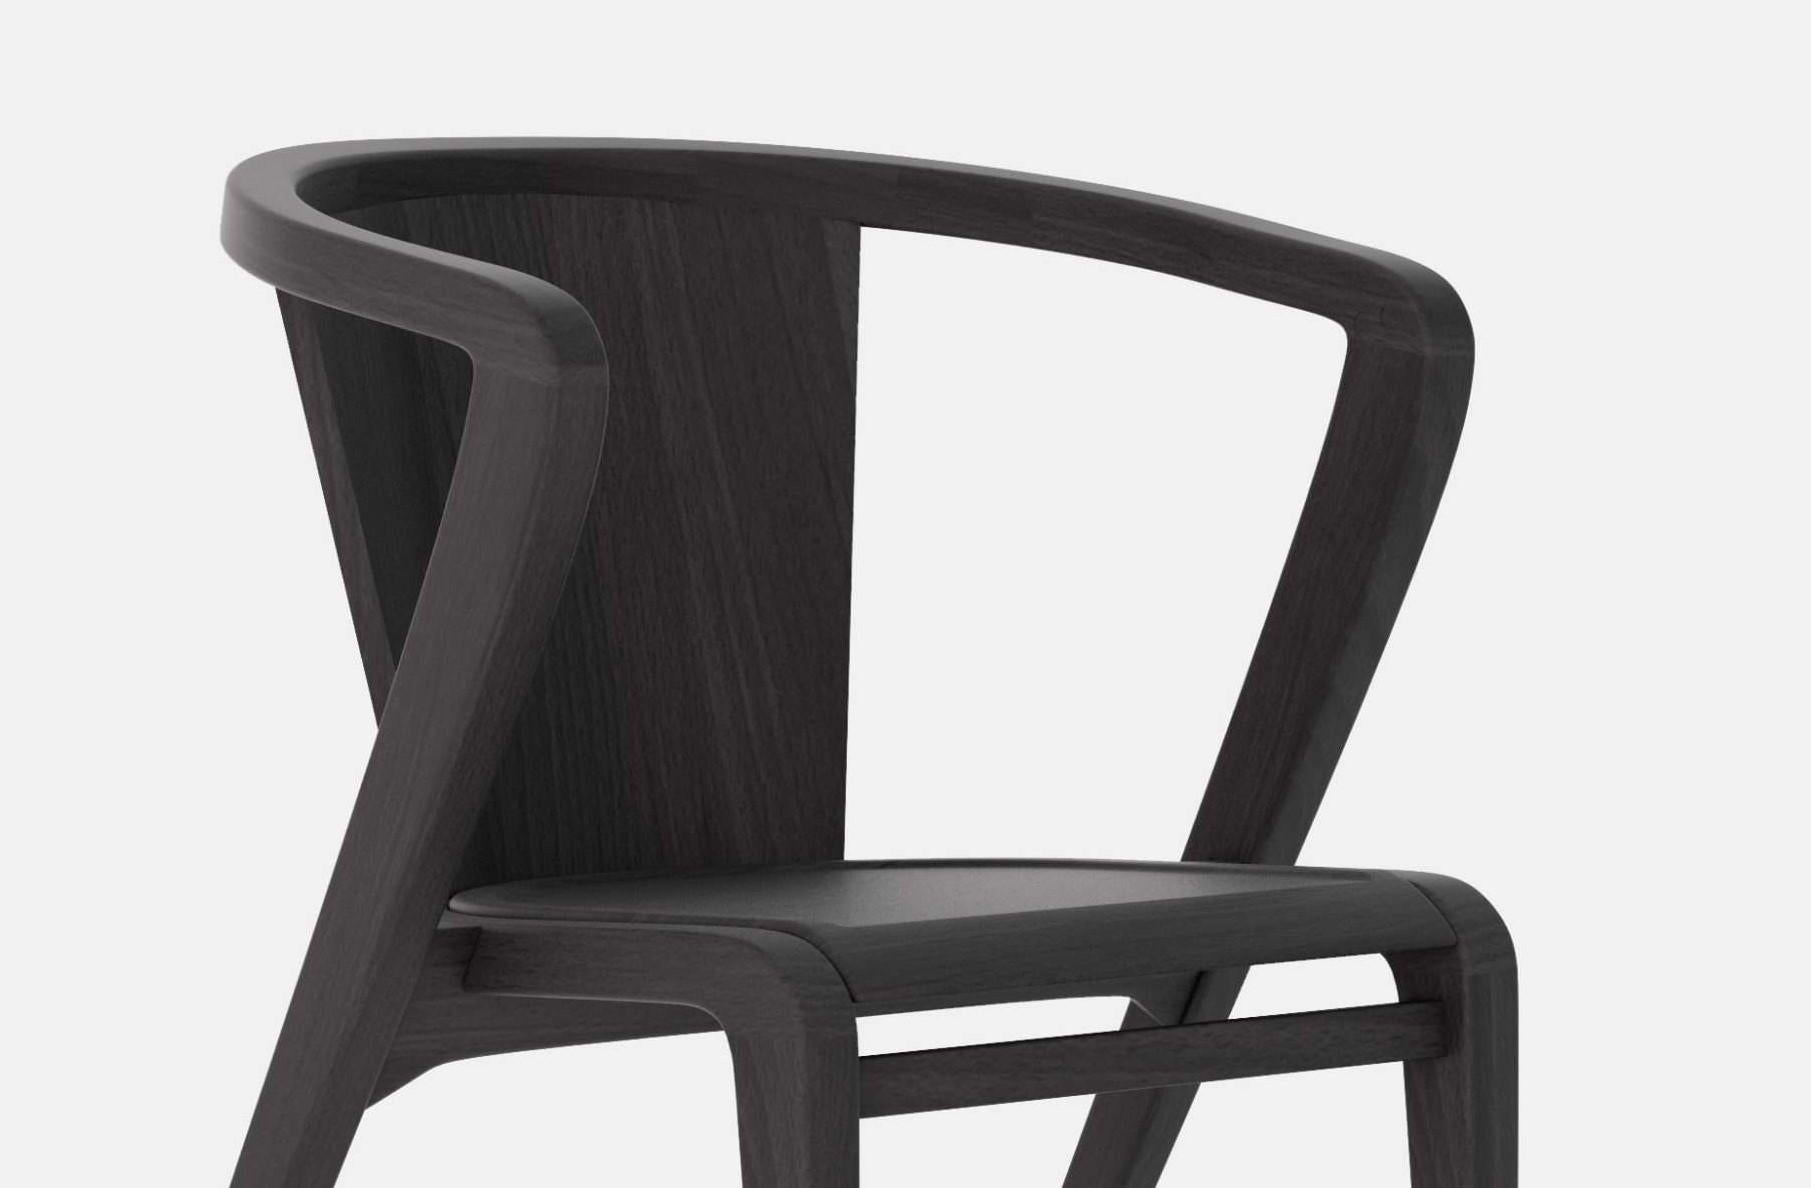 Organic Modern Portuguese Roots Chair in Black Pastel Ashwood by Alexandre Caldas